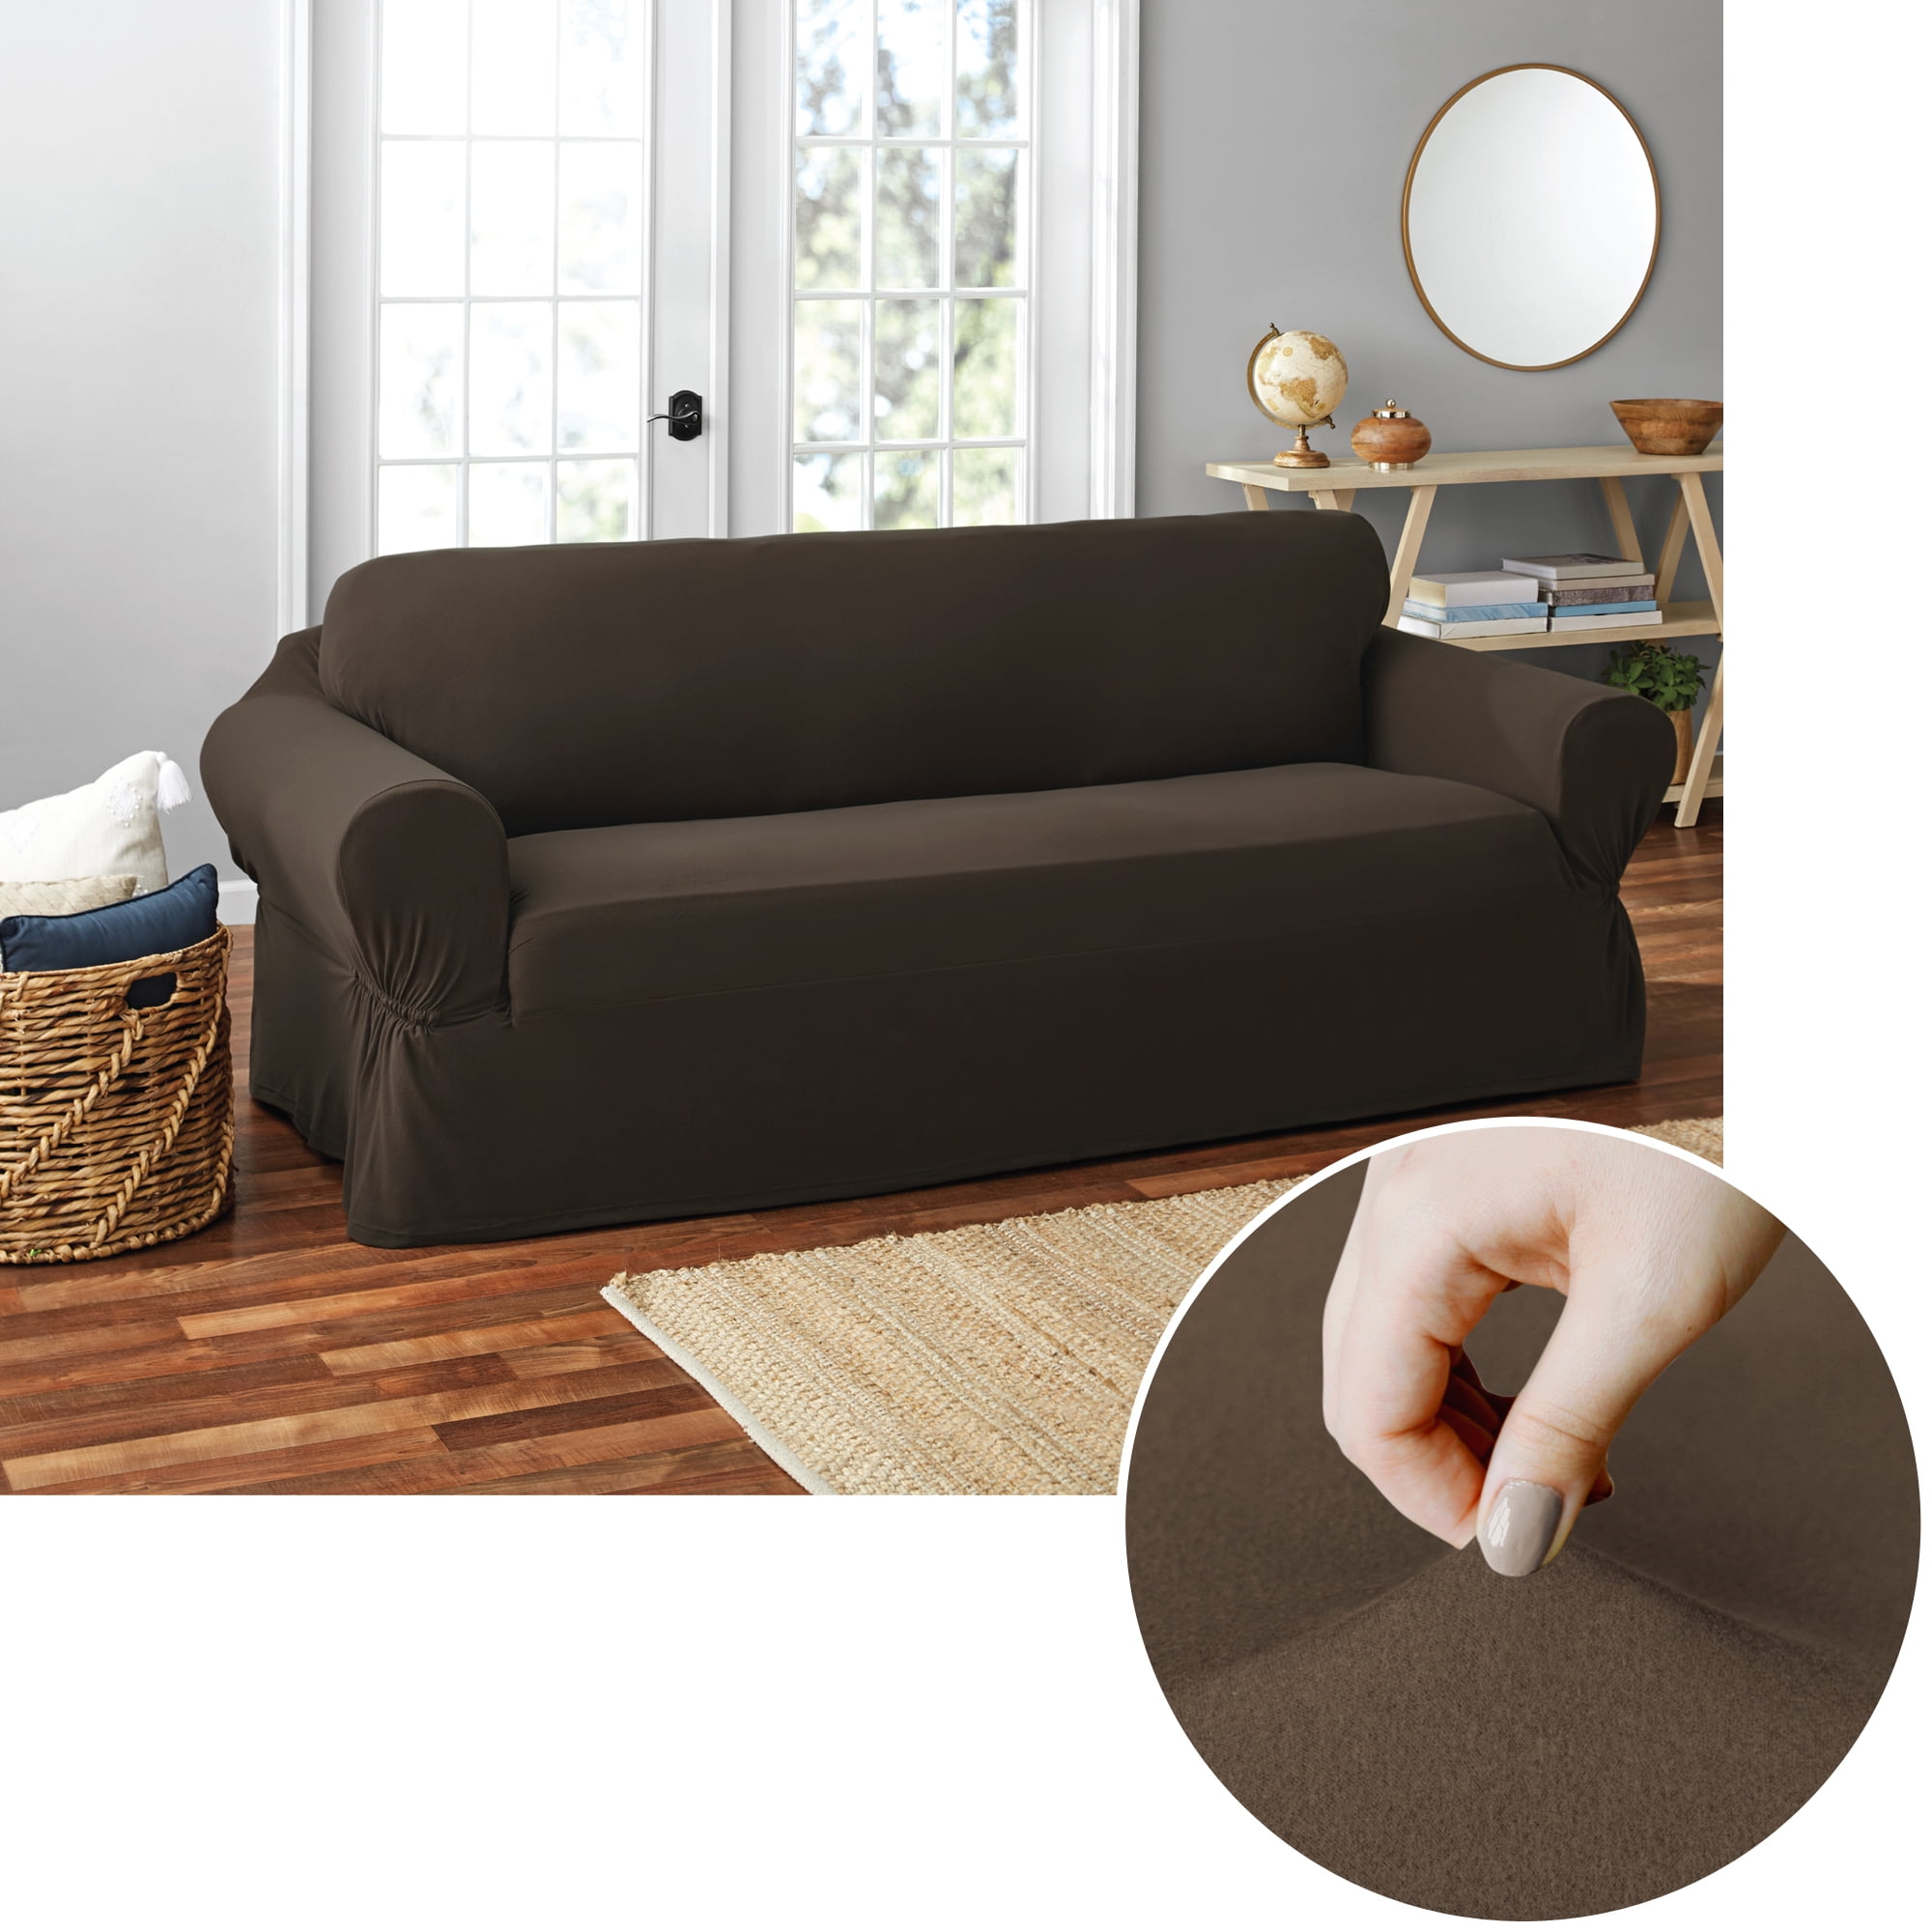 Mainstays Sofa Soft Touch Stretch, How To Put A Stretch Cover On Sofa